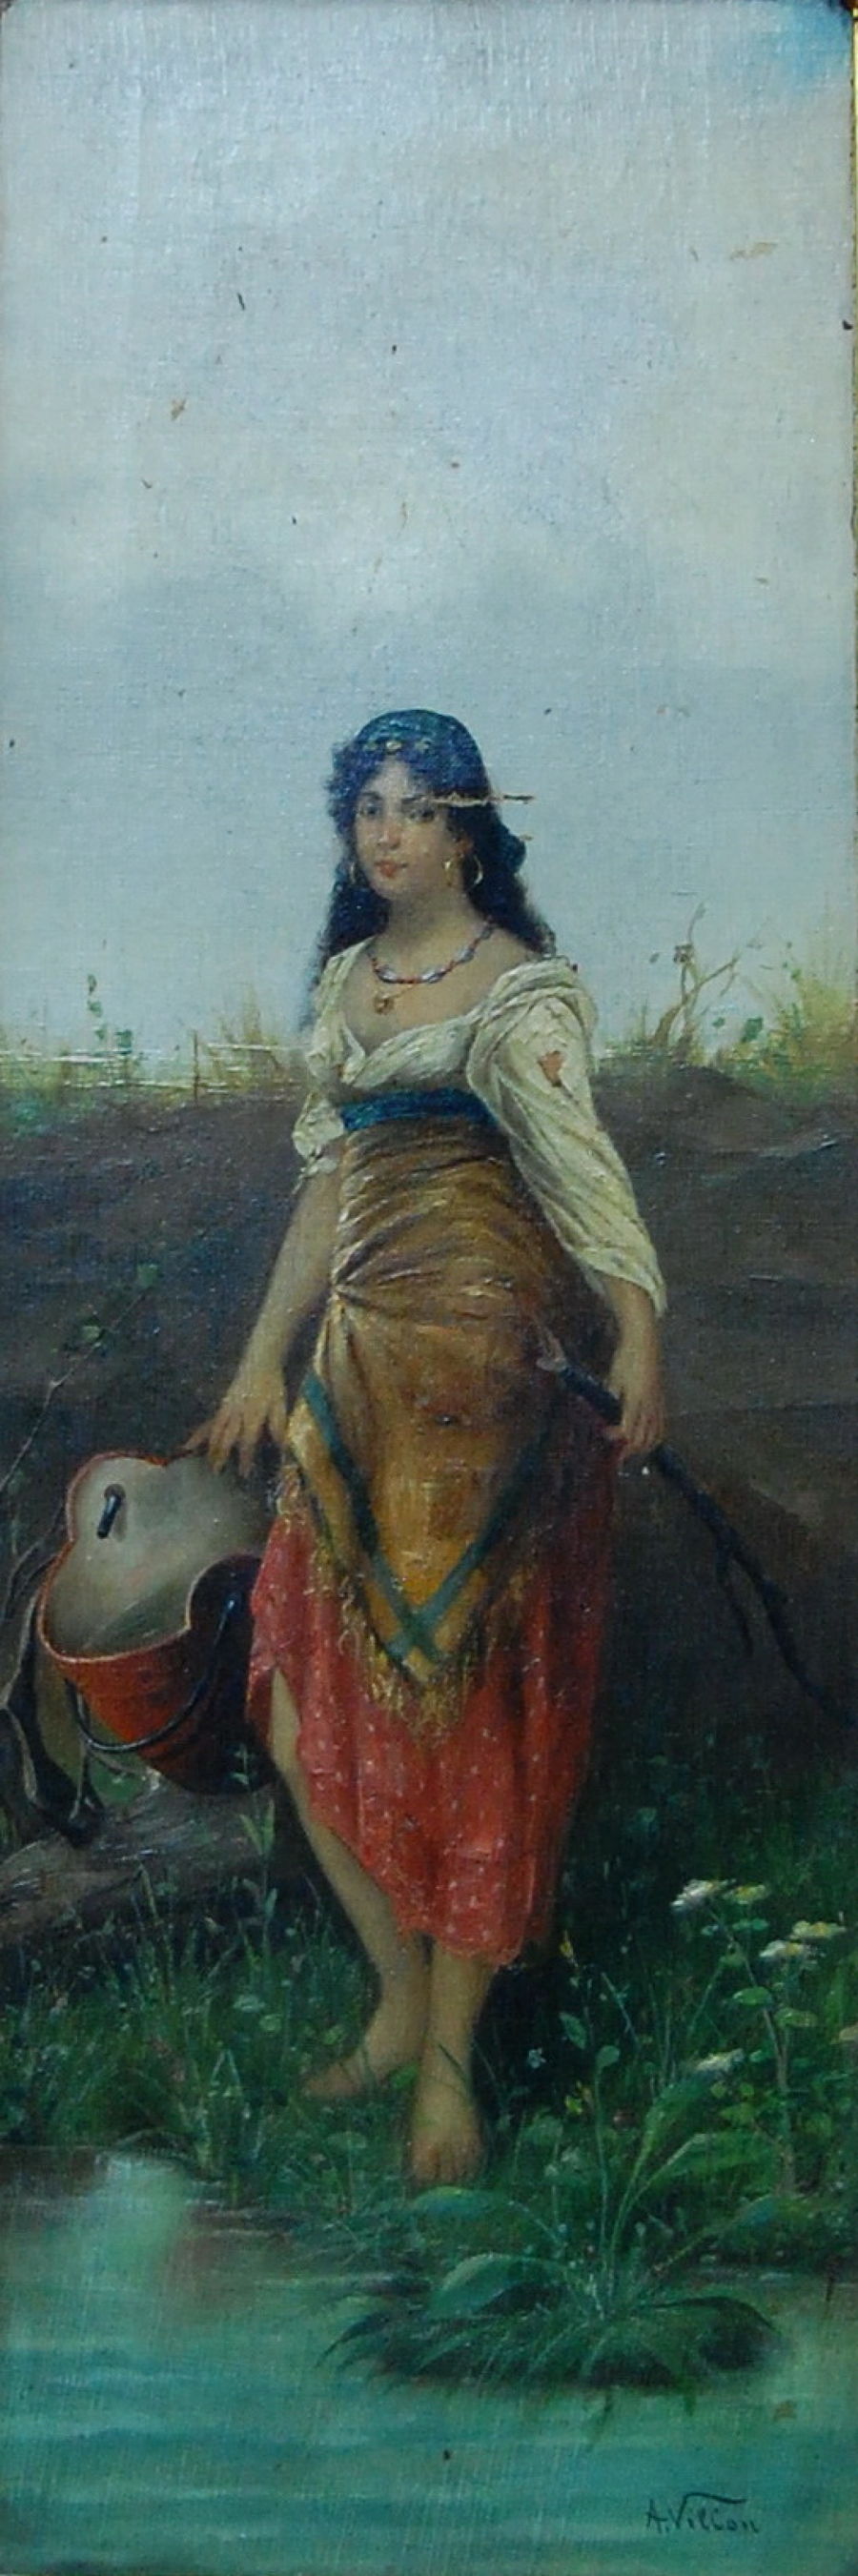 Romanticism Oil painting River Girl by A. Villon